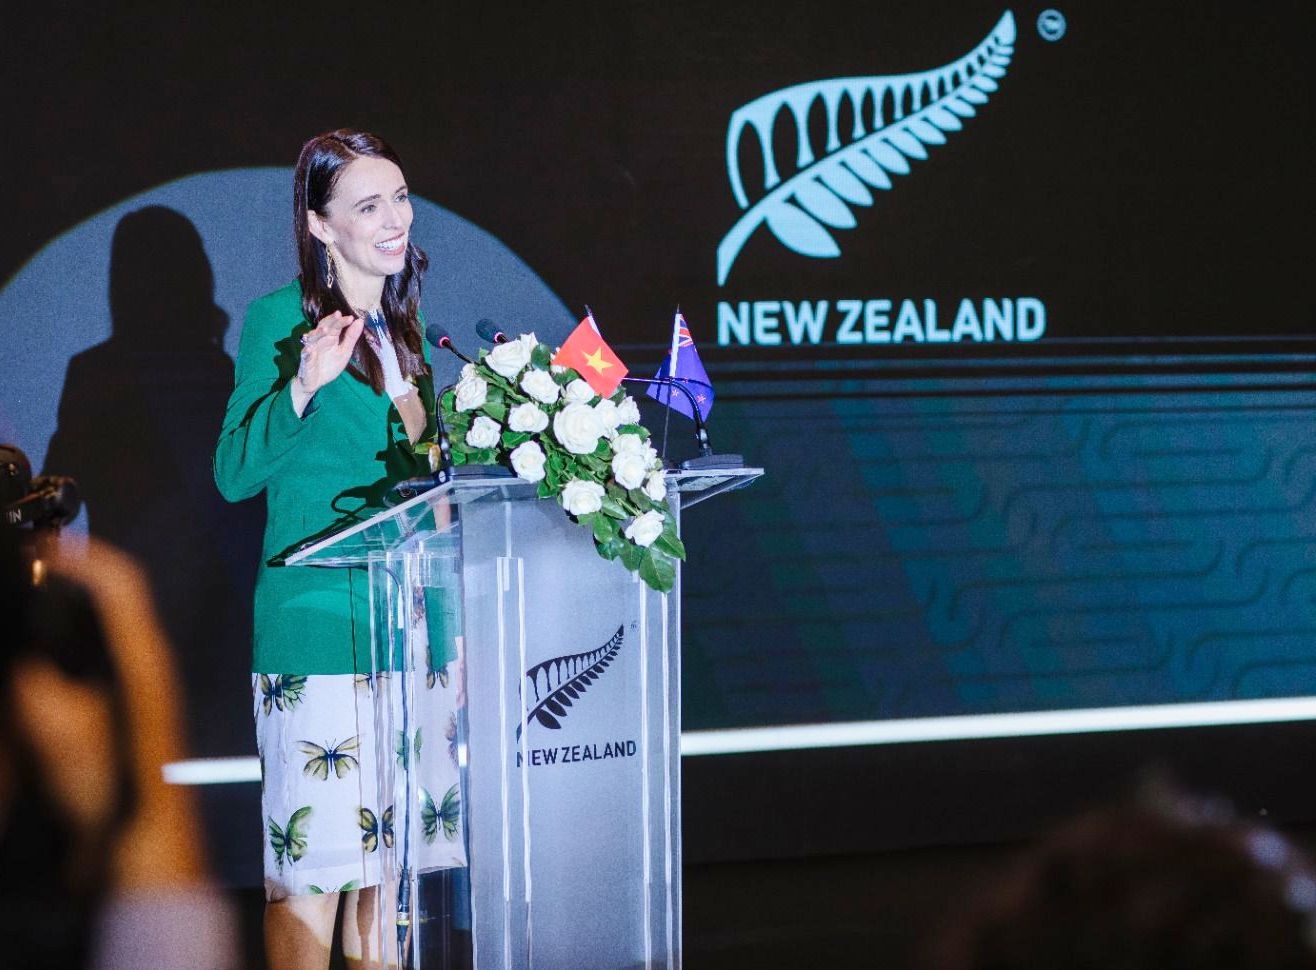 PM Jacinda Ardern leads New Zealand trade delegation to renew connection with Vietnam